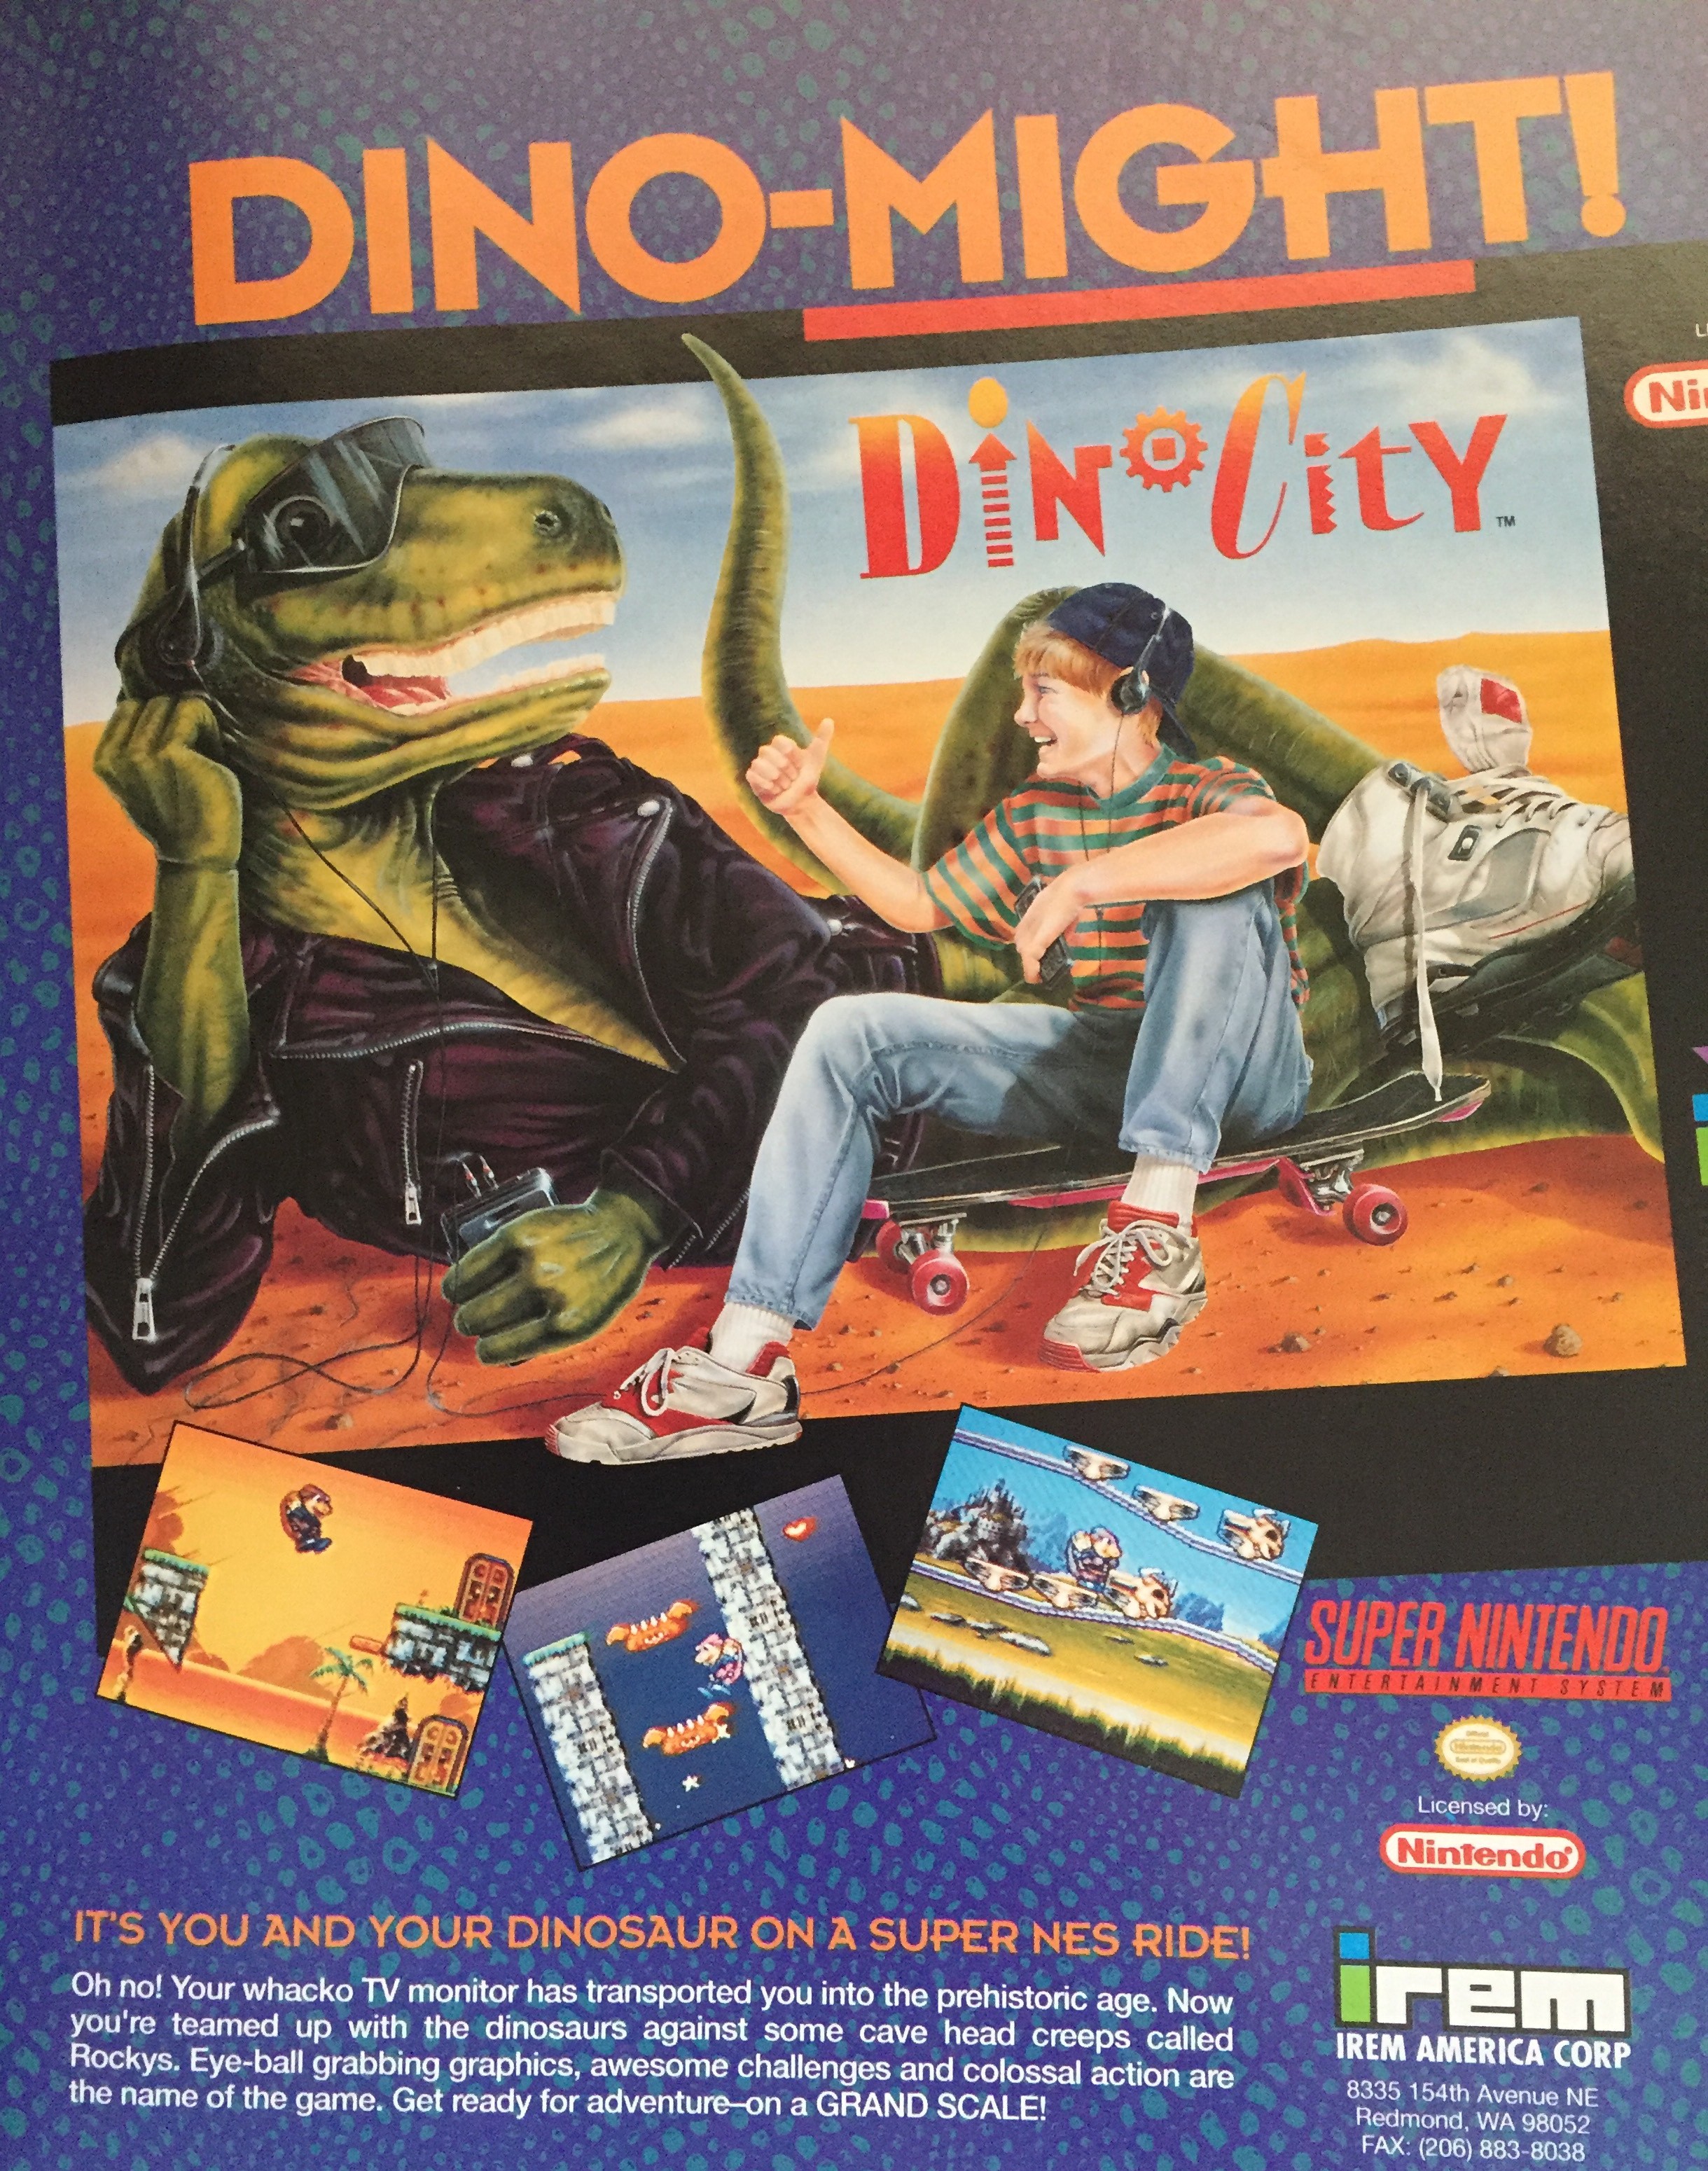 Such a bizarre box art. Totally early 90s!